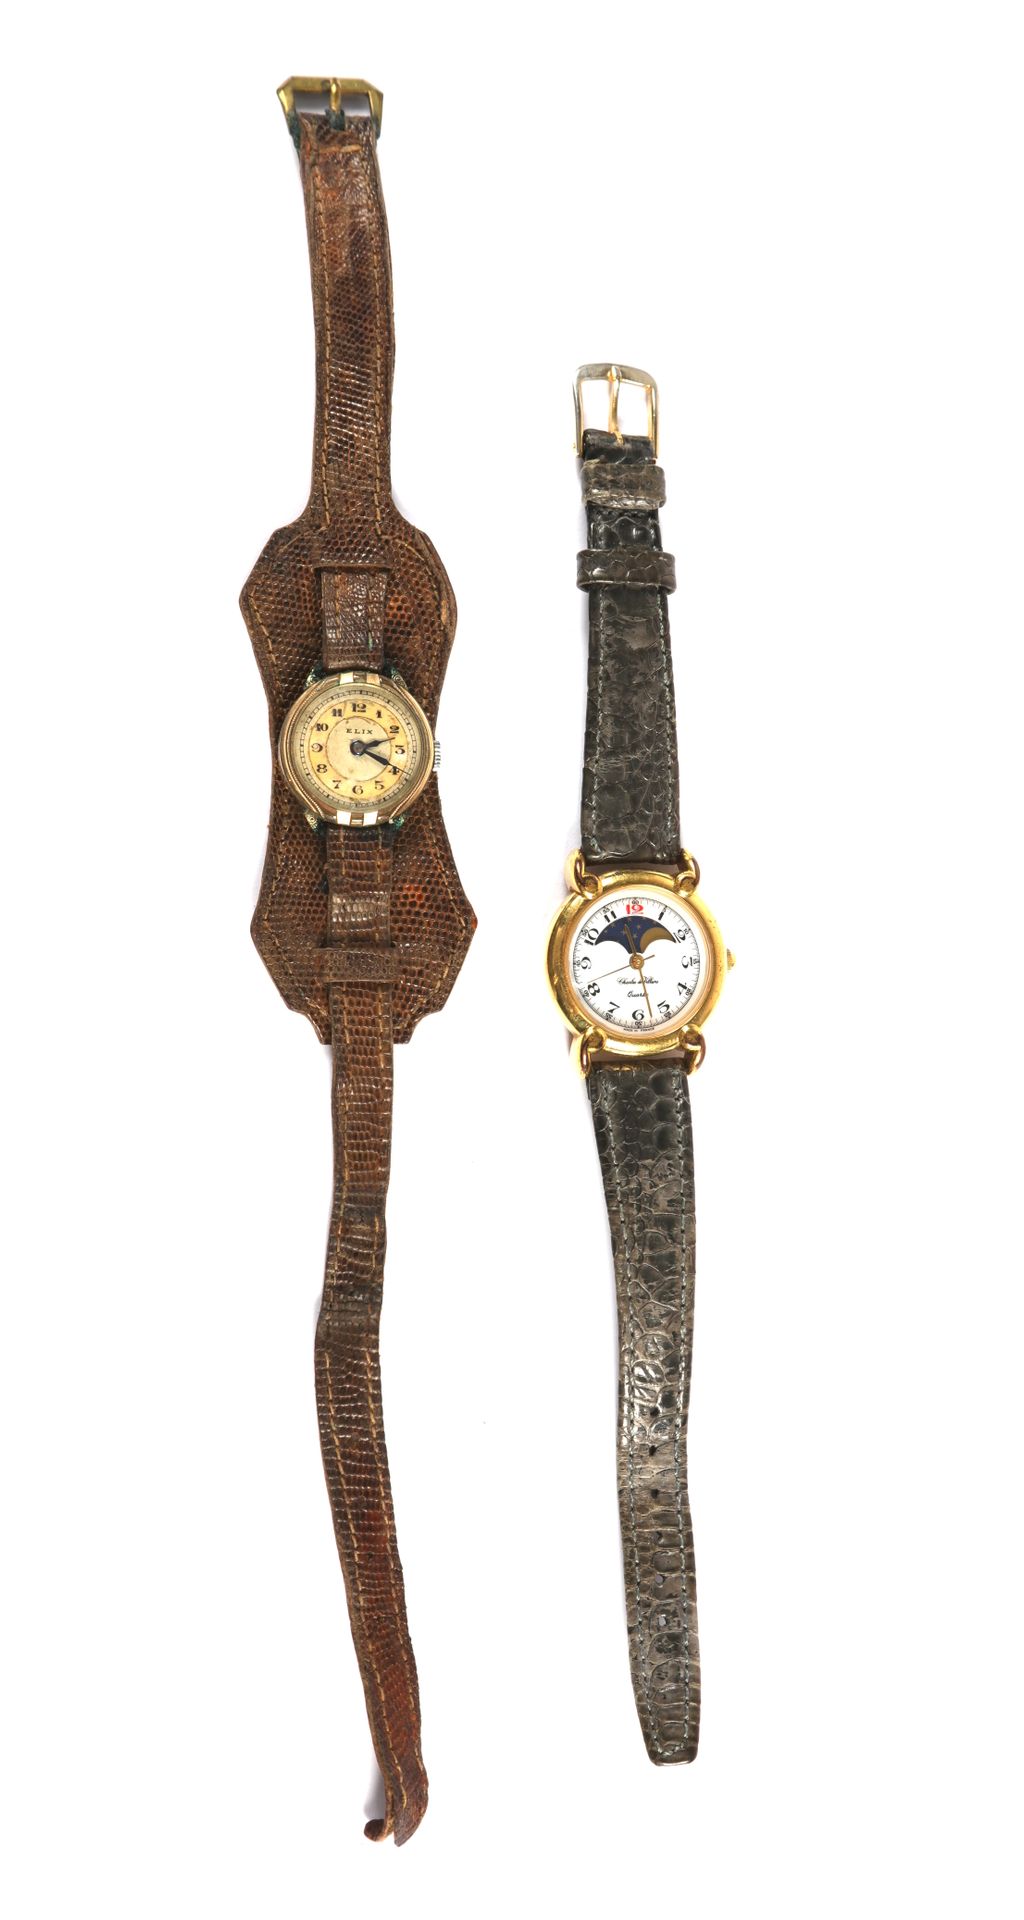 Null Lot of two watches, Charles de Villiers (quartz) and Elix watch on lizard.